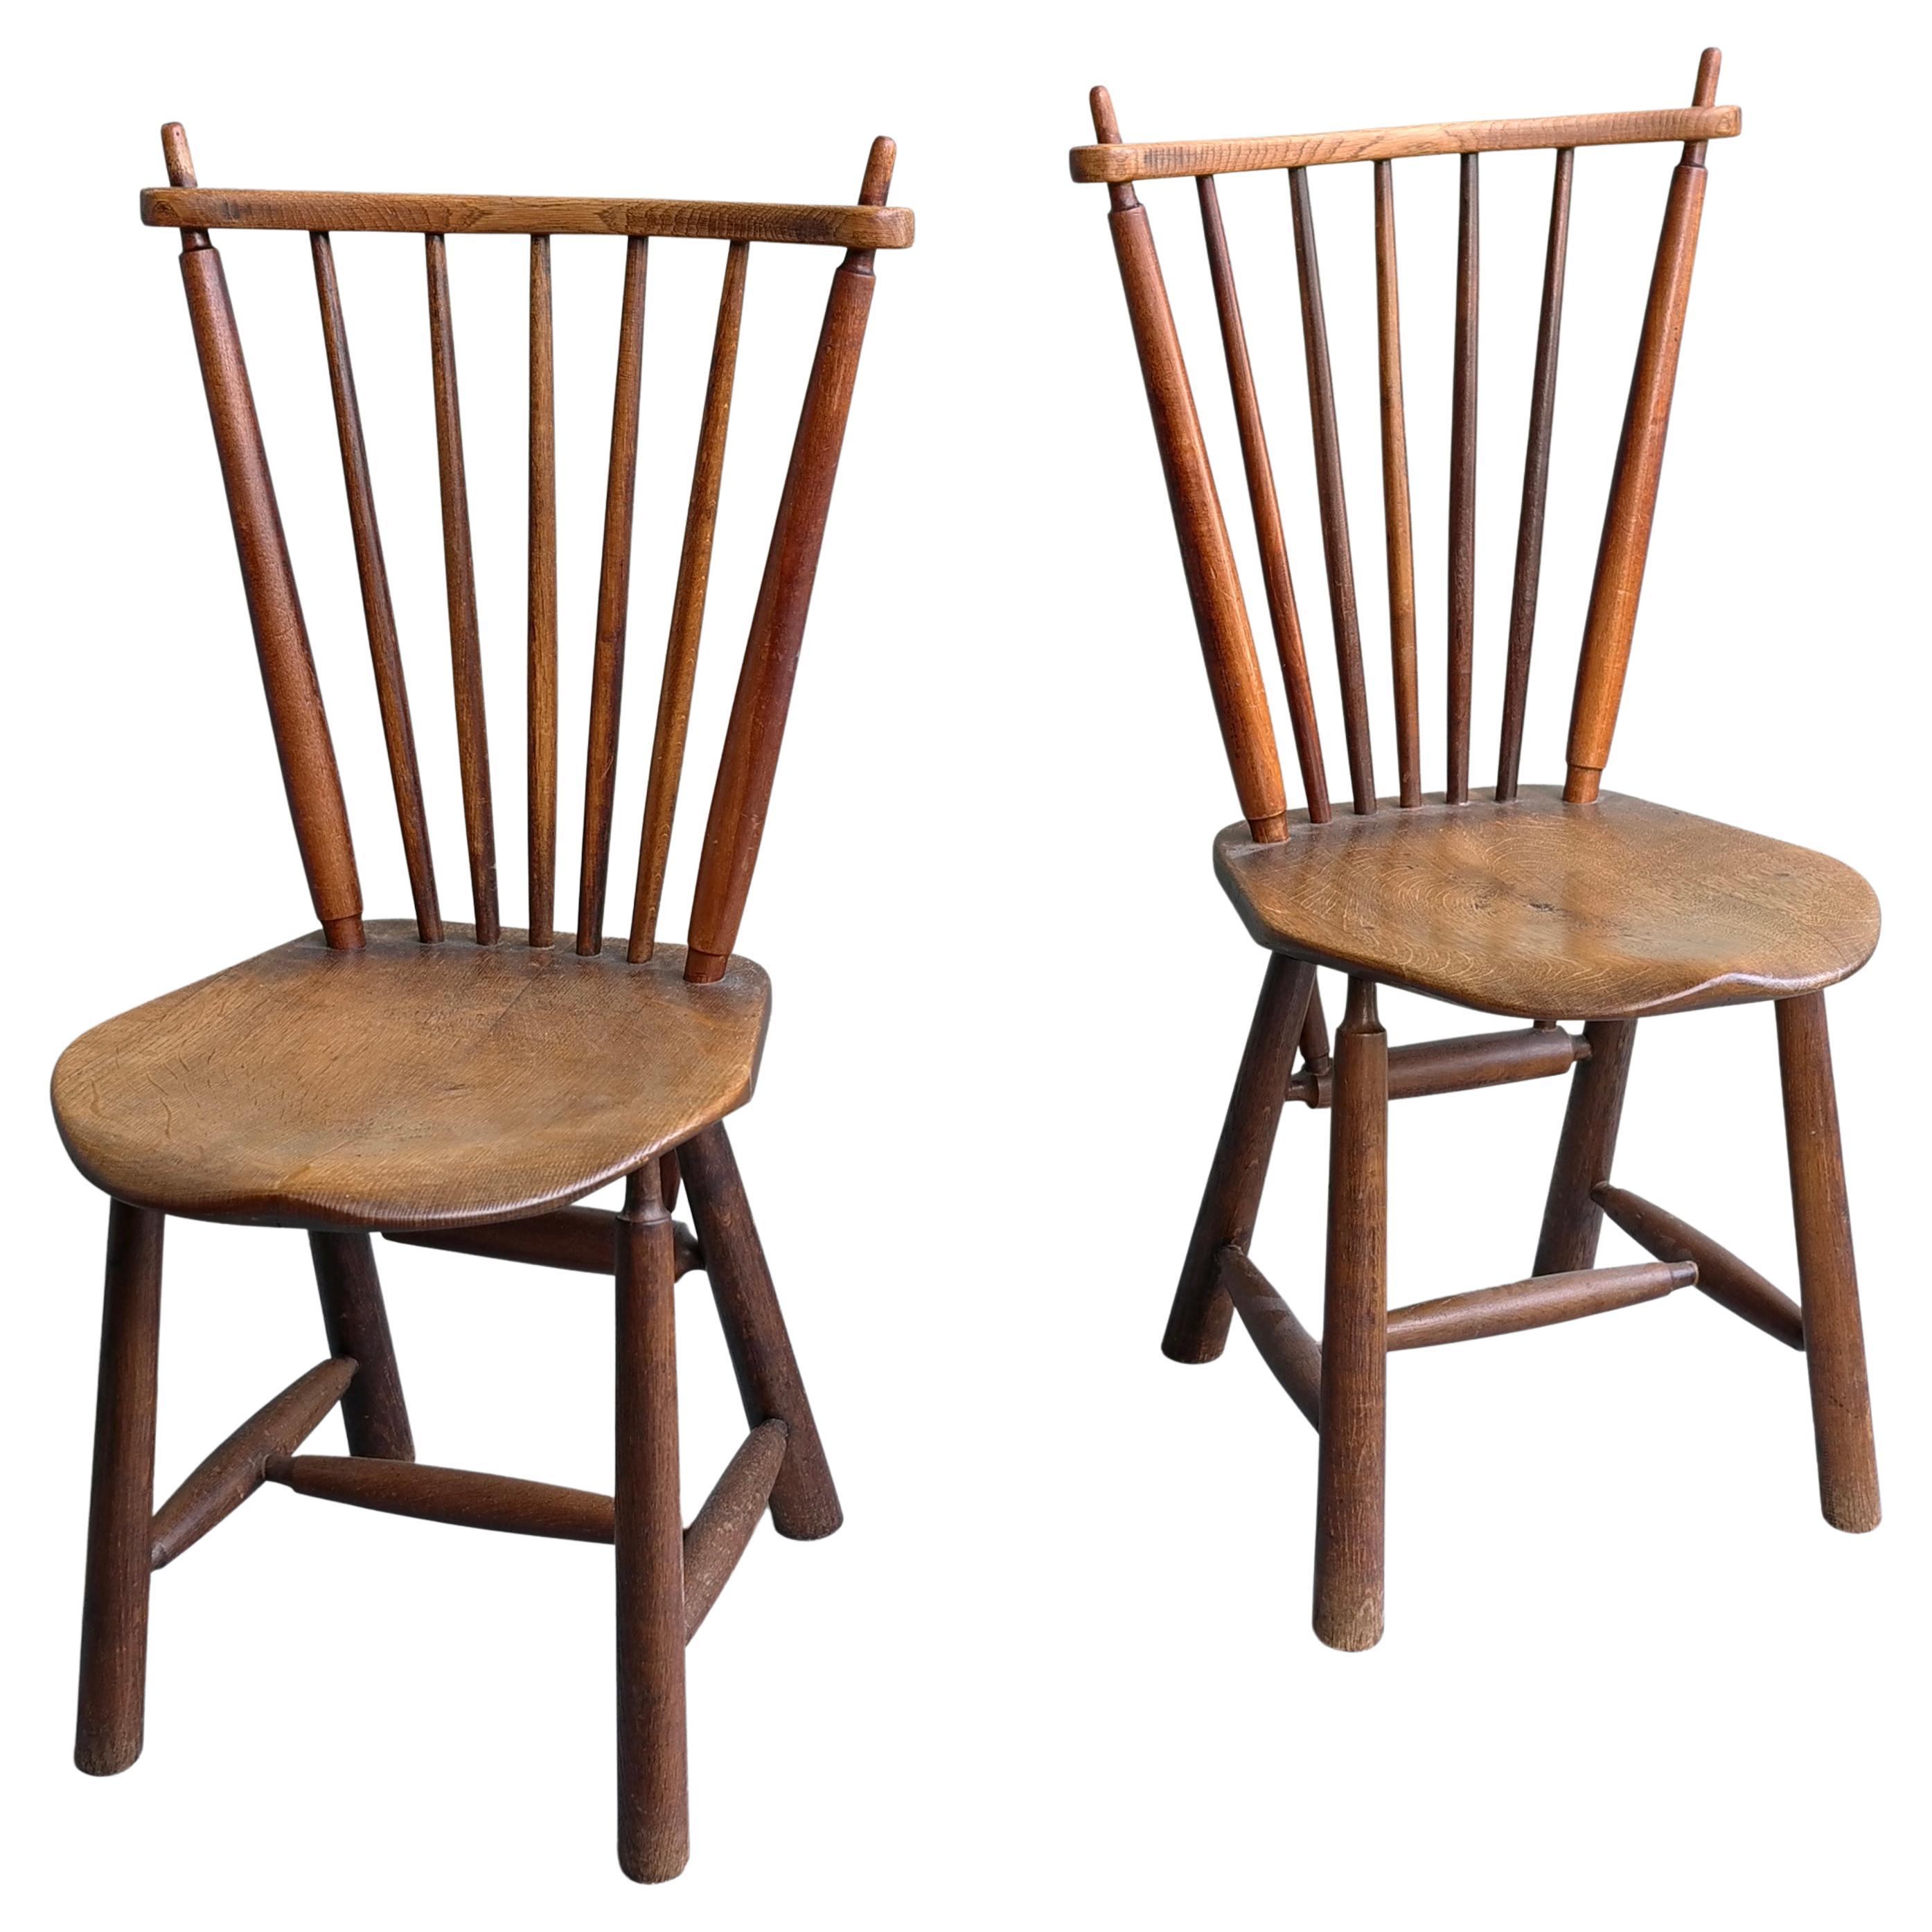 Pair of Organic Mid-Century Modern Solid Oak Side Chairs, 1960's